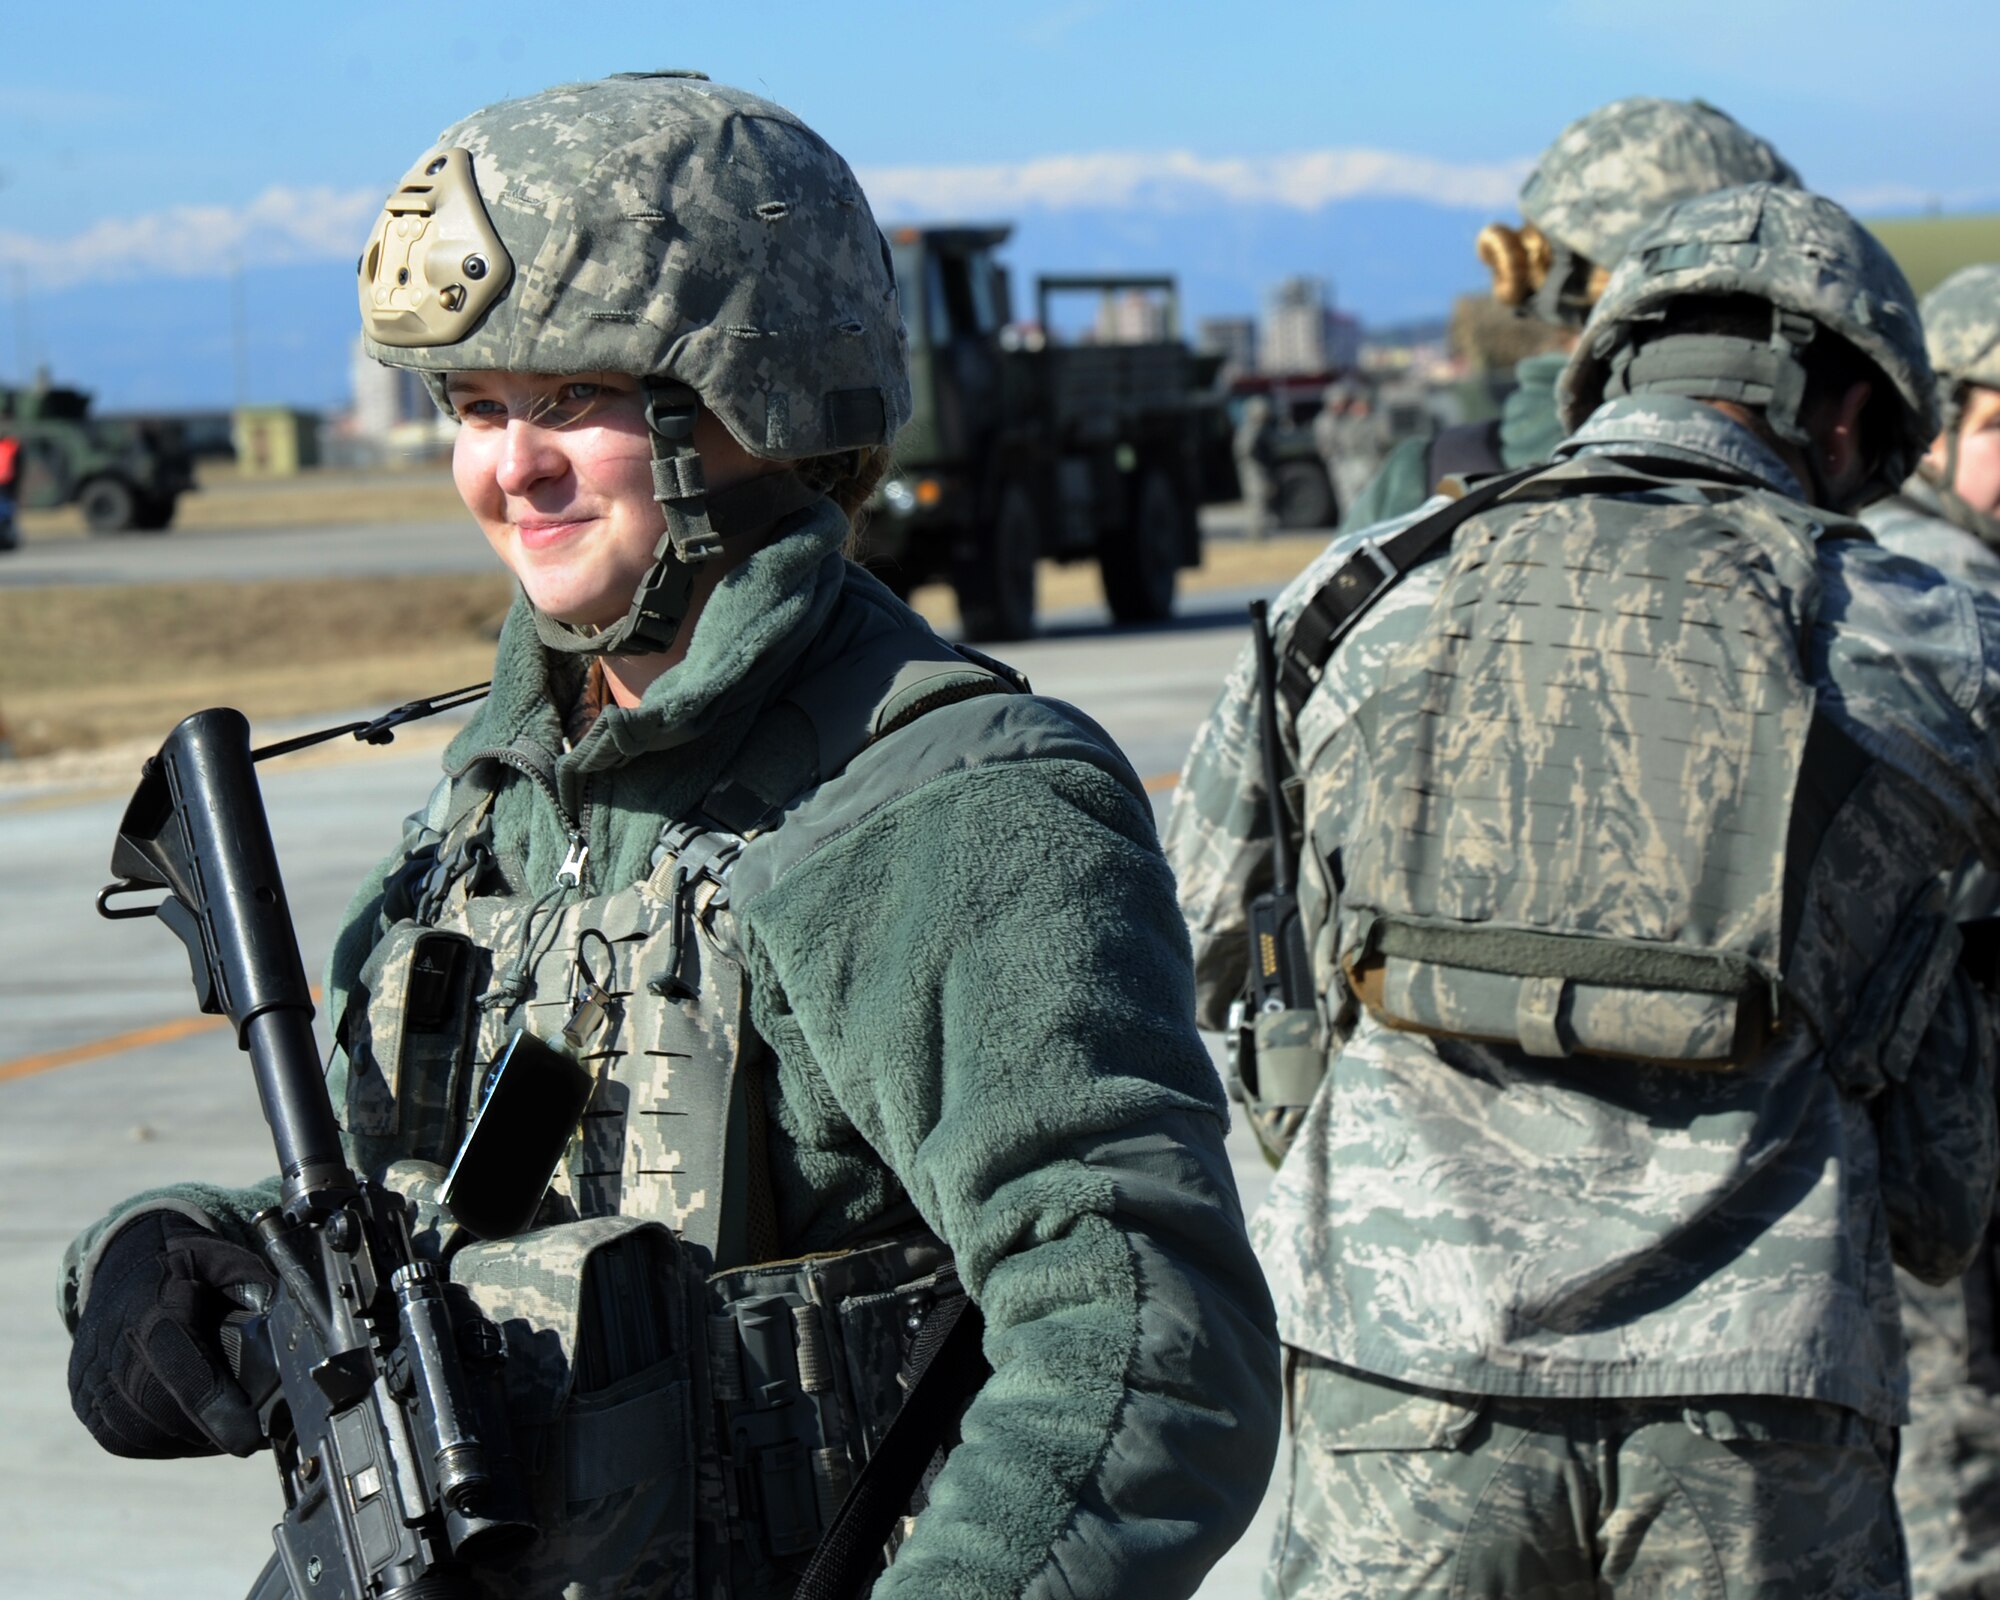 U.S. Air Force Airman 1st Class Sarah Schafer, 39th Security Forces Squadron member, stands ready with her weapon during an exercise Jan. 15, 2016, on Incirlik Air Base, Turkey. Exercises like this ensure the security of the installation as well as give defenders first-hand experience in emergency scenarios. (U.S. Air Force photo by Airman 1st Class Daniel Lile/Released)